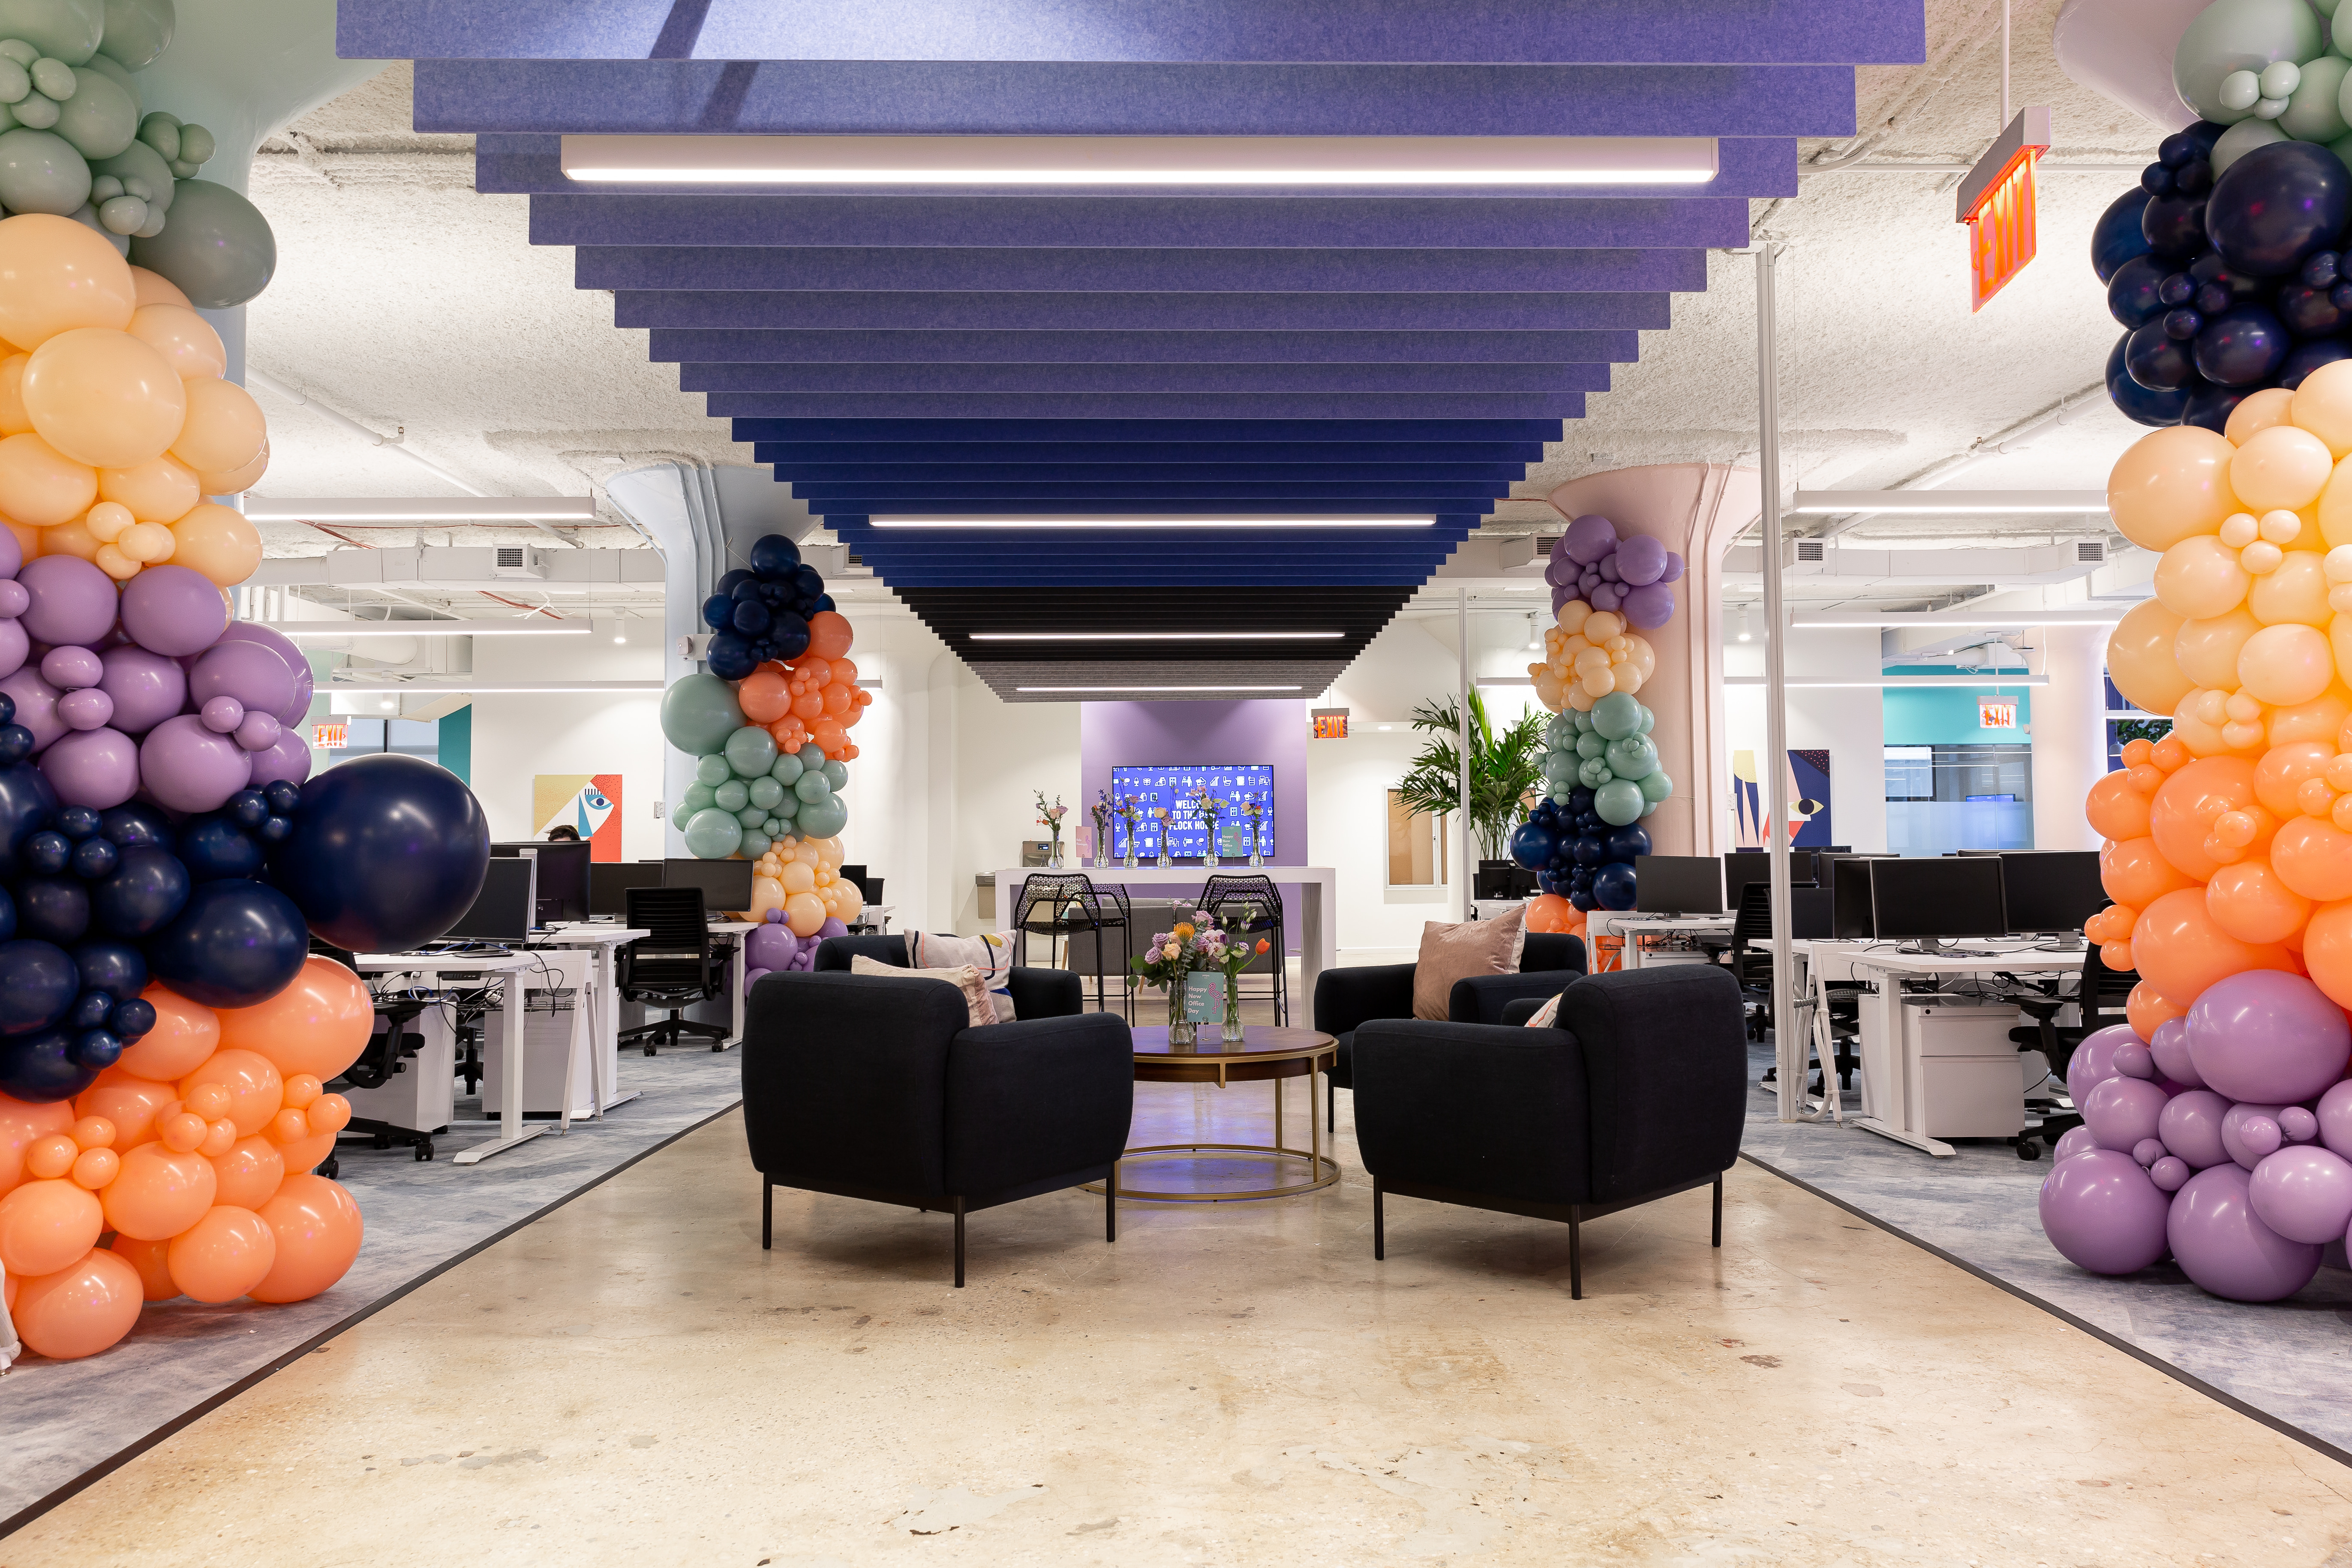 Photo of Yotpo’s NYC office with balloon columns and meeting nooks between bench-desk seating.